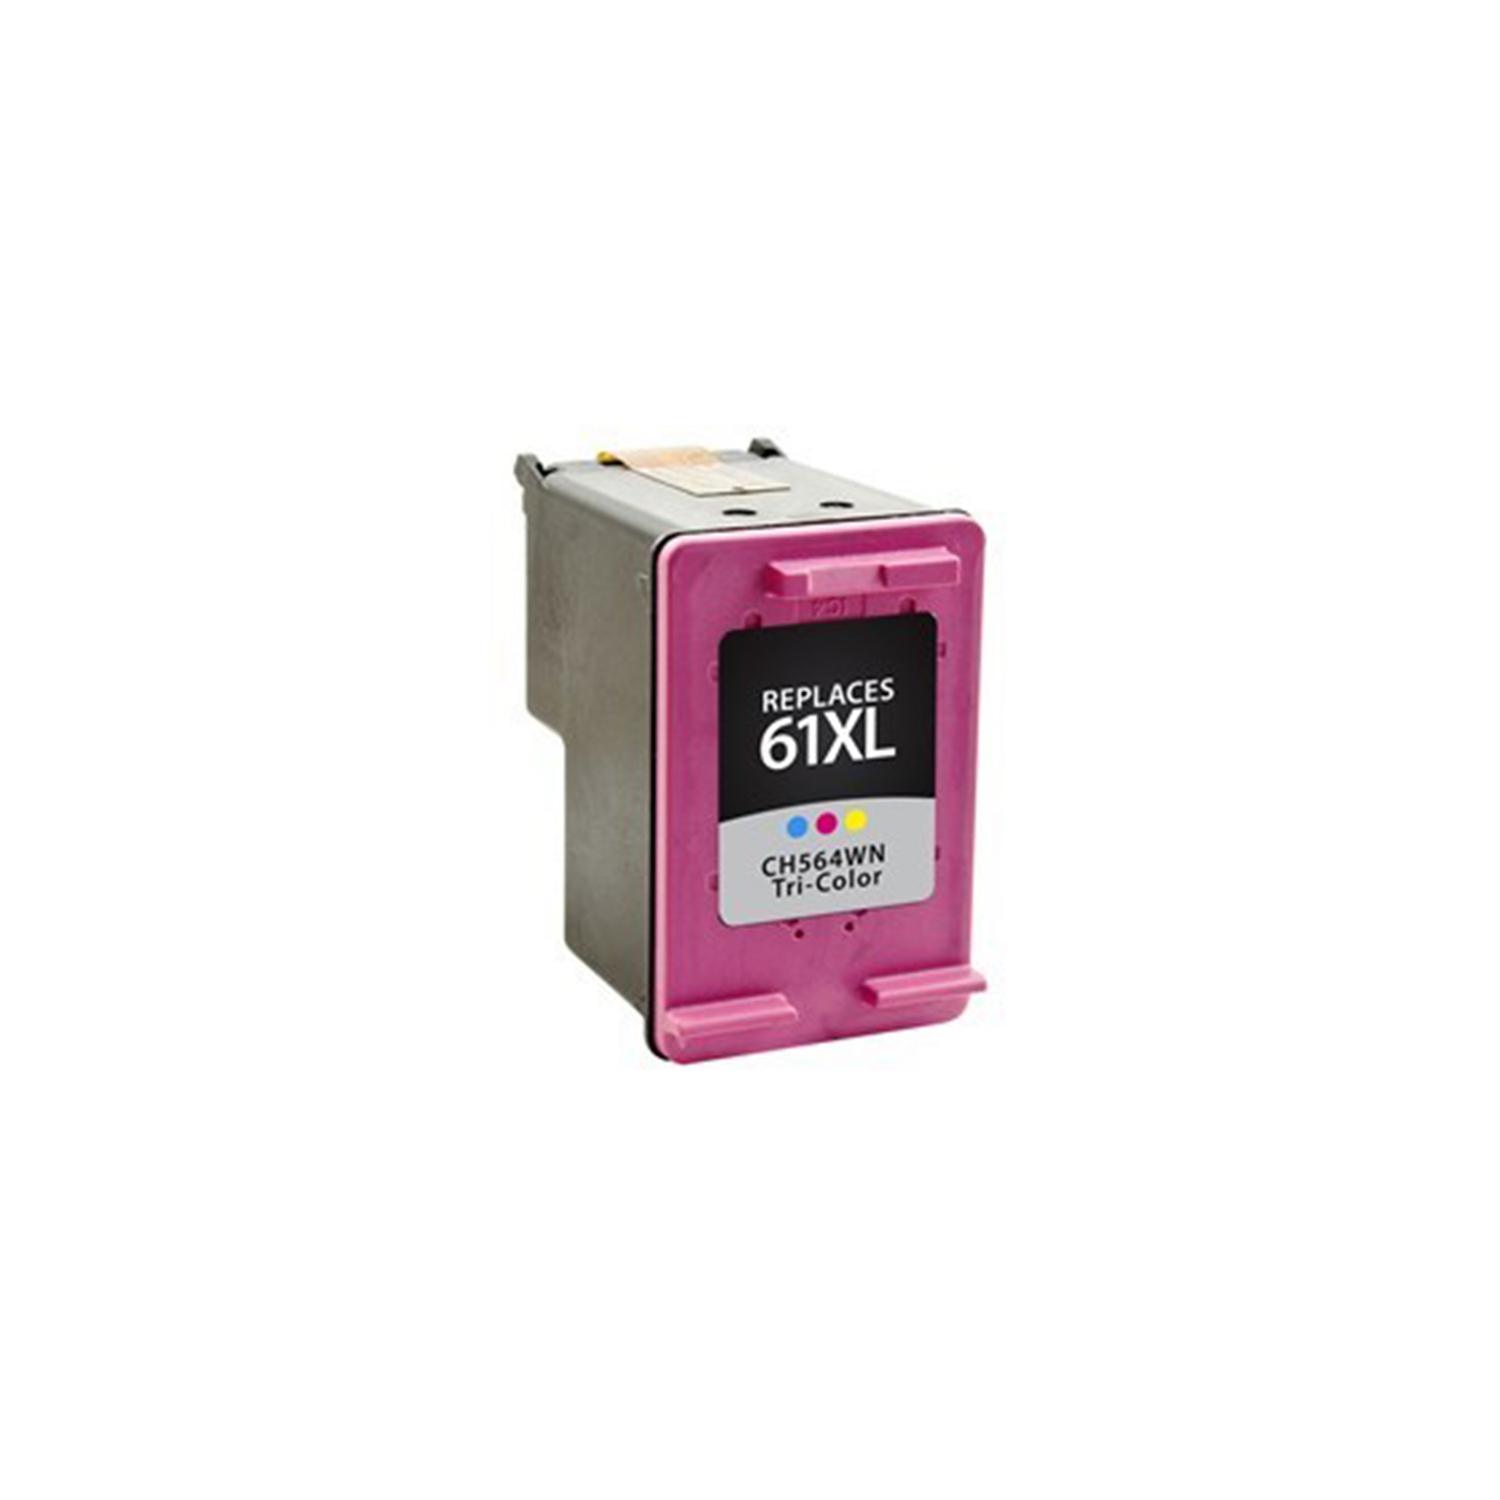 Bestink Compatible HP 61XL CH564WN Tri-Color Ink Cartridge